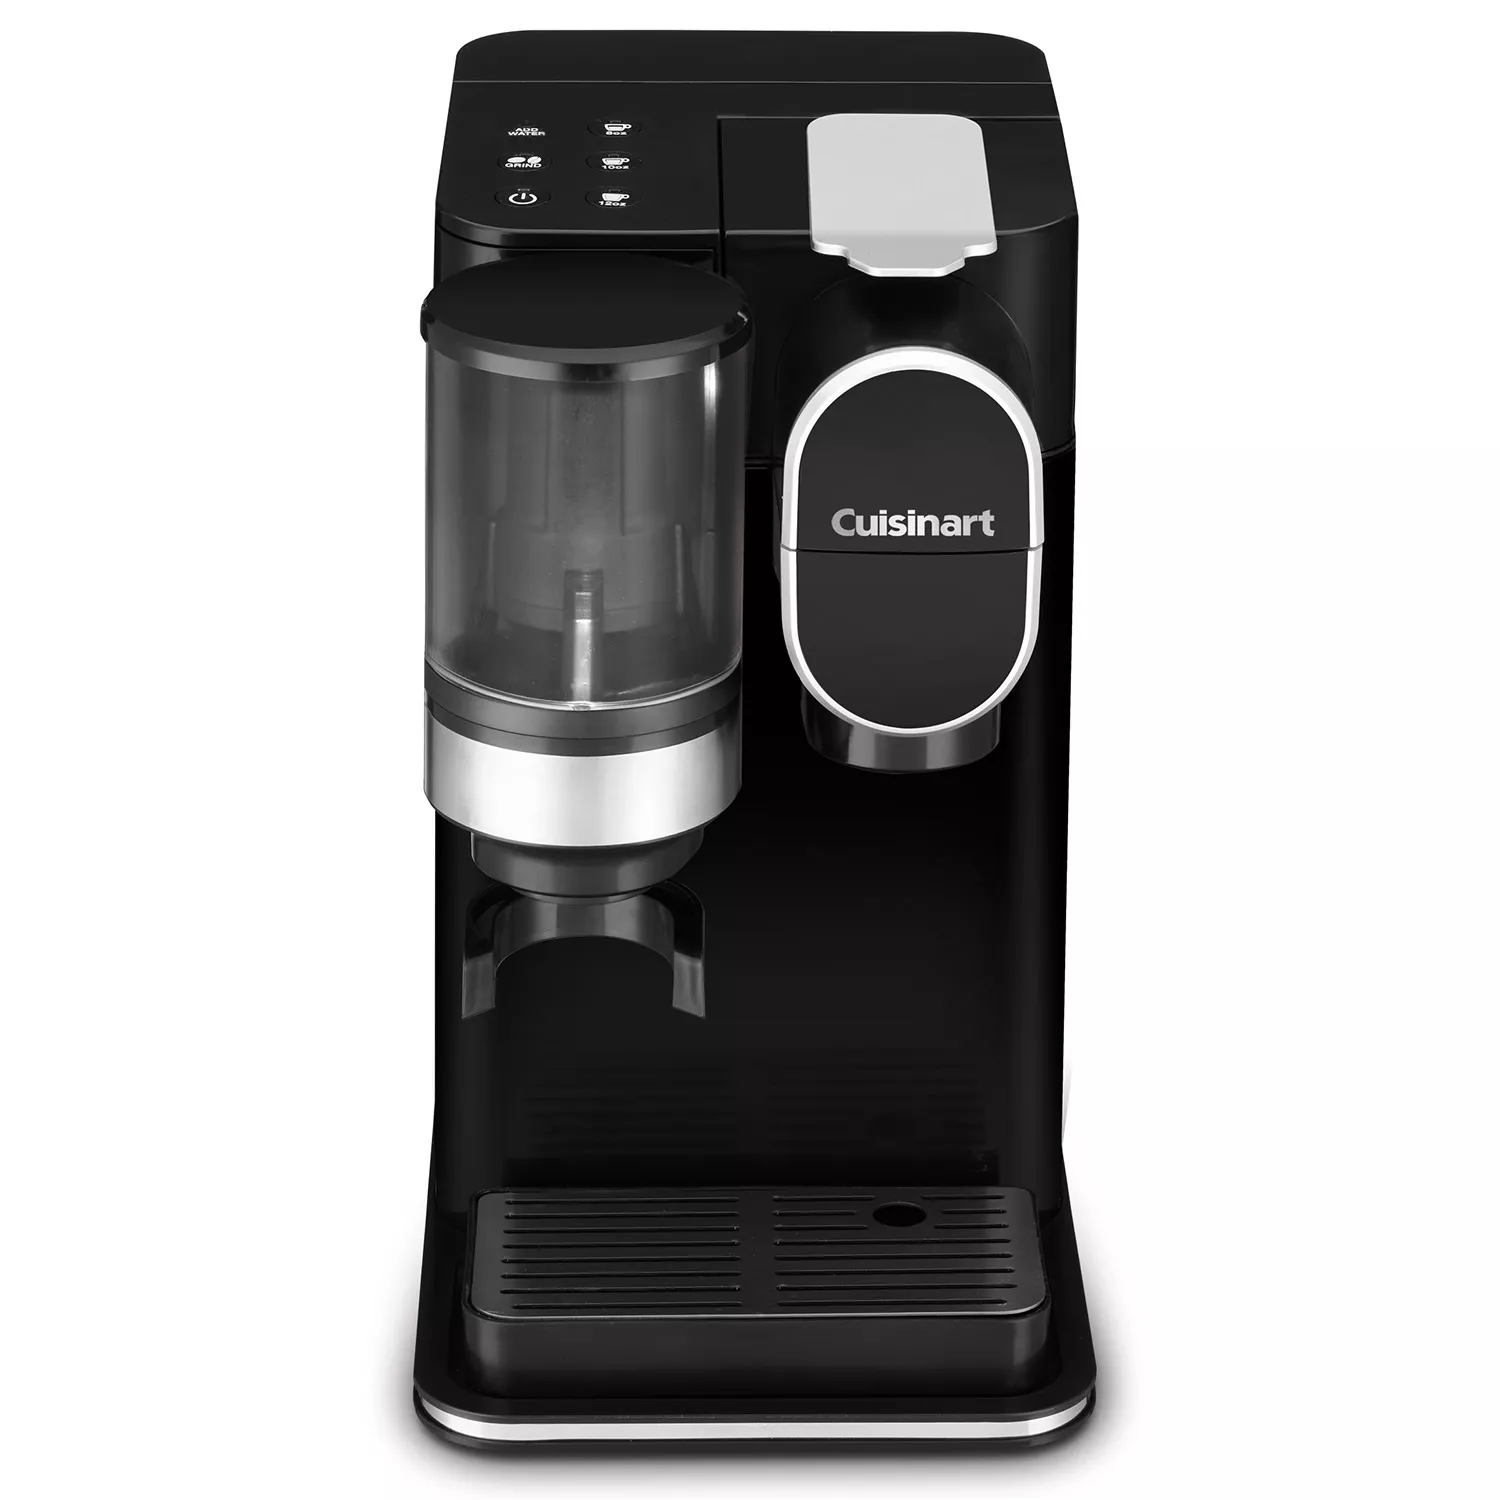 Commercial 15 Bar Grind And Brew 2in1 Coffee Machine Electric